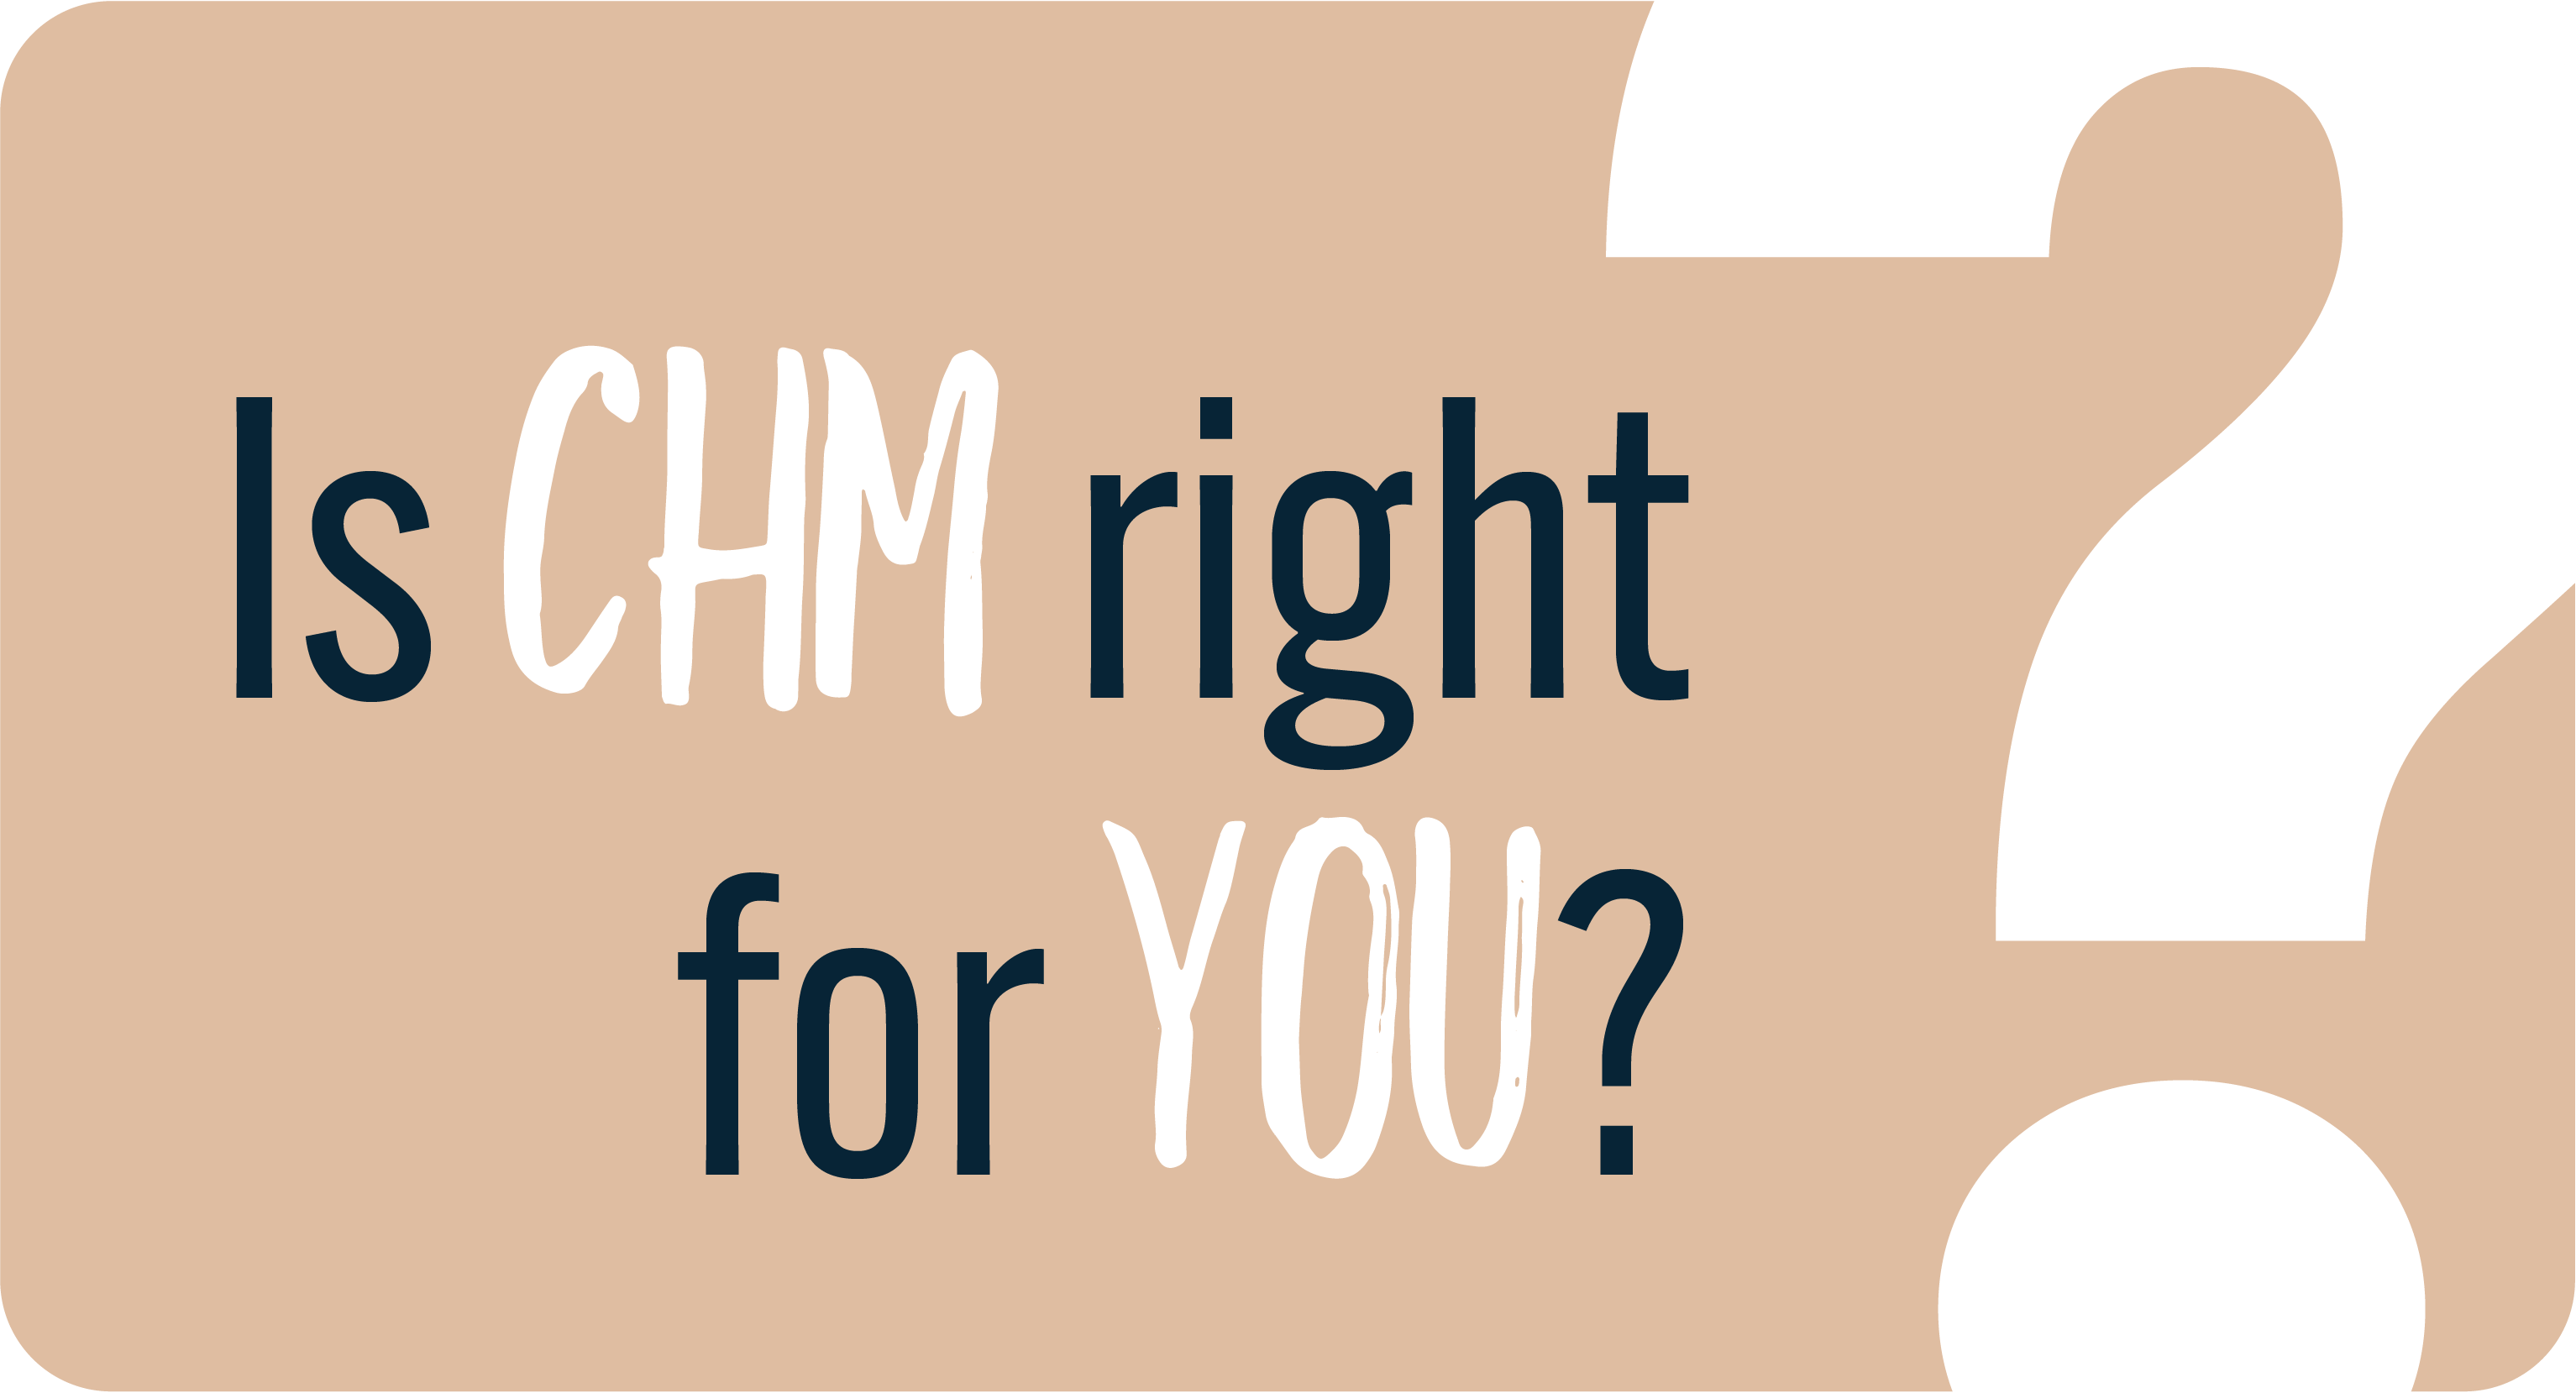 Is CHM right for me? Take the quiz to find out!